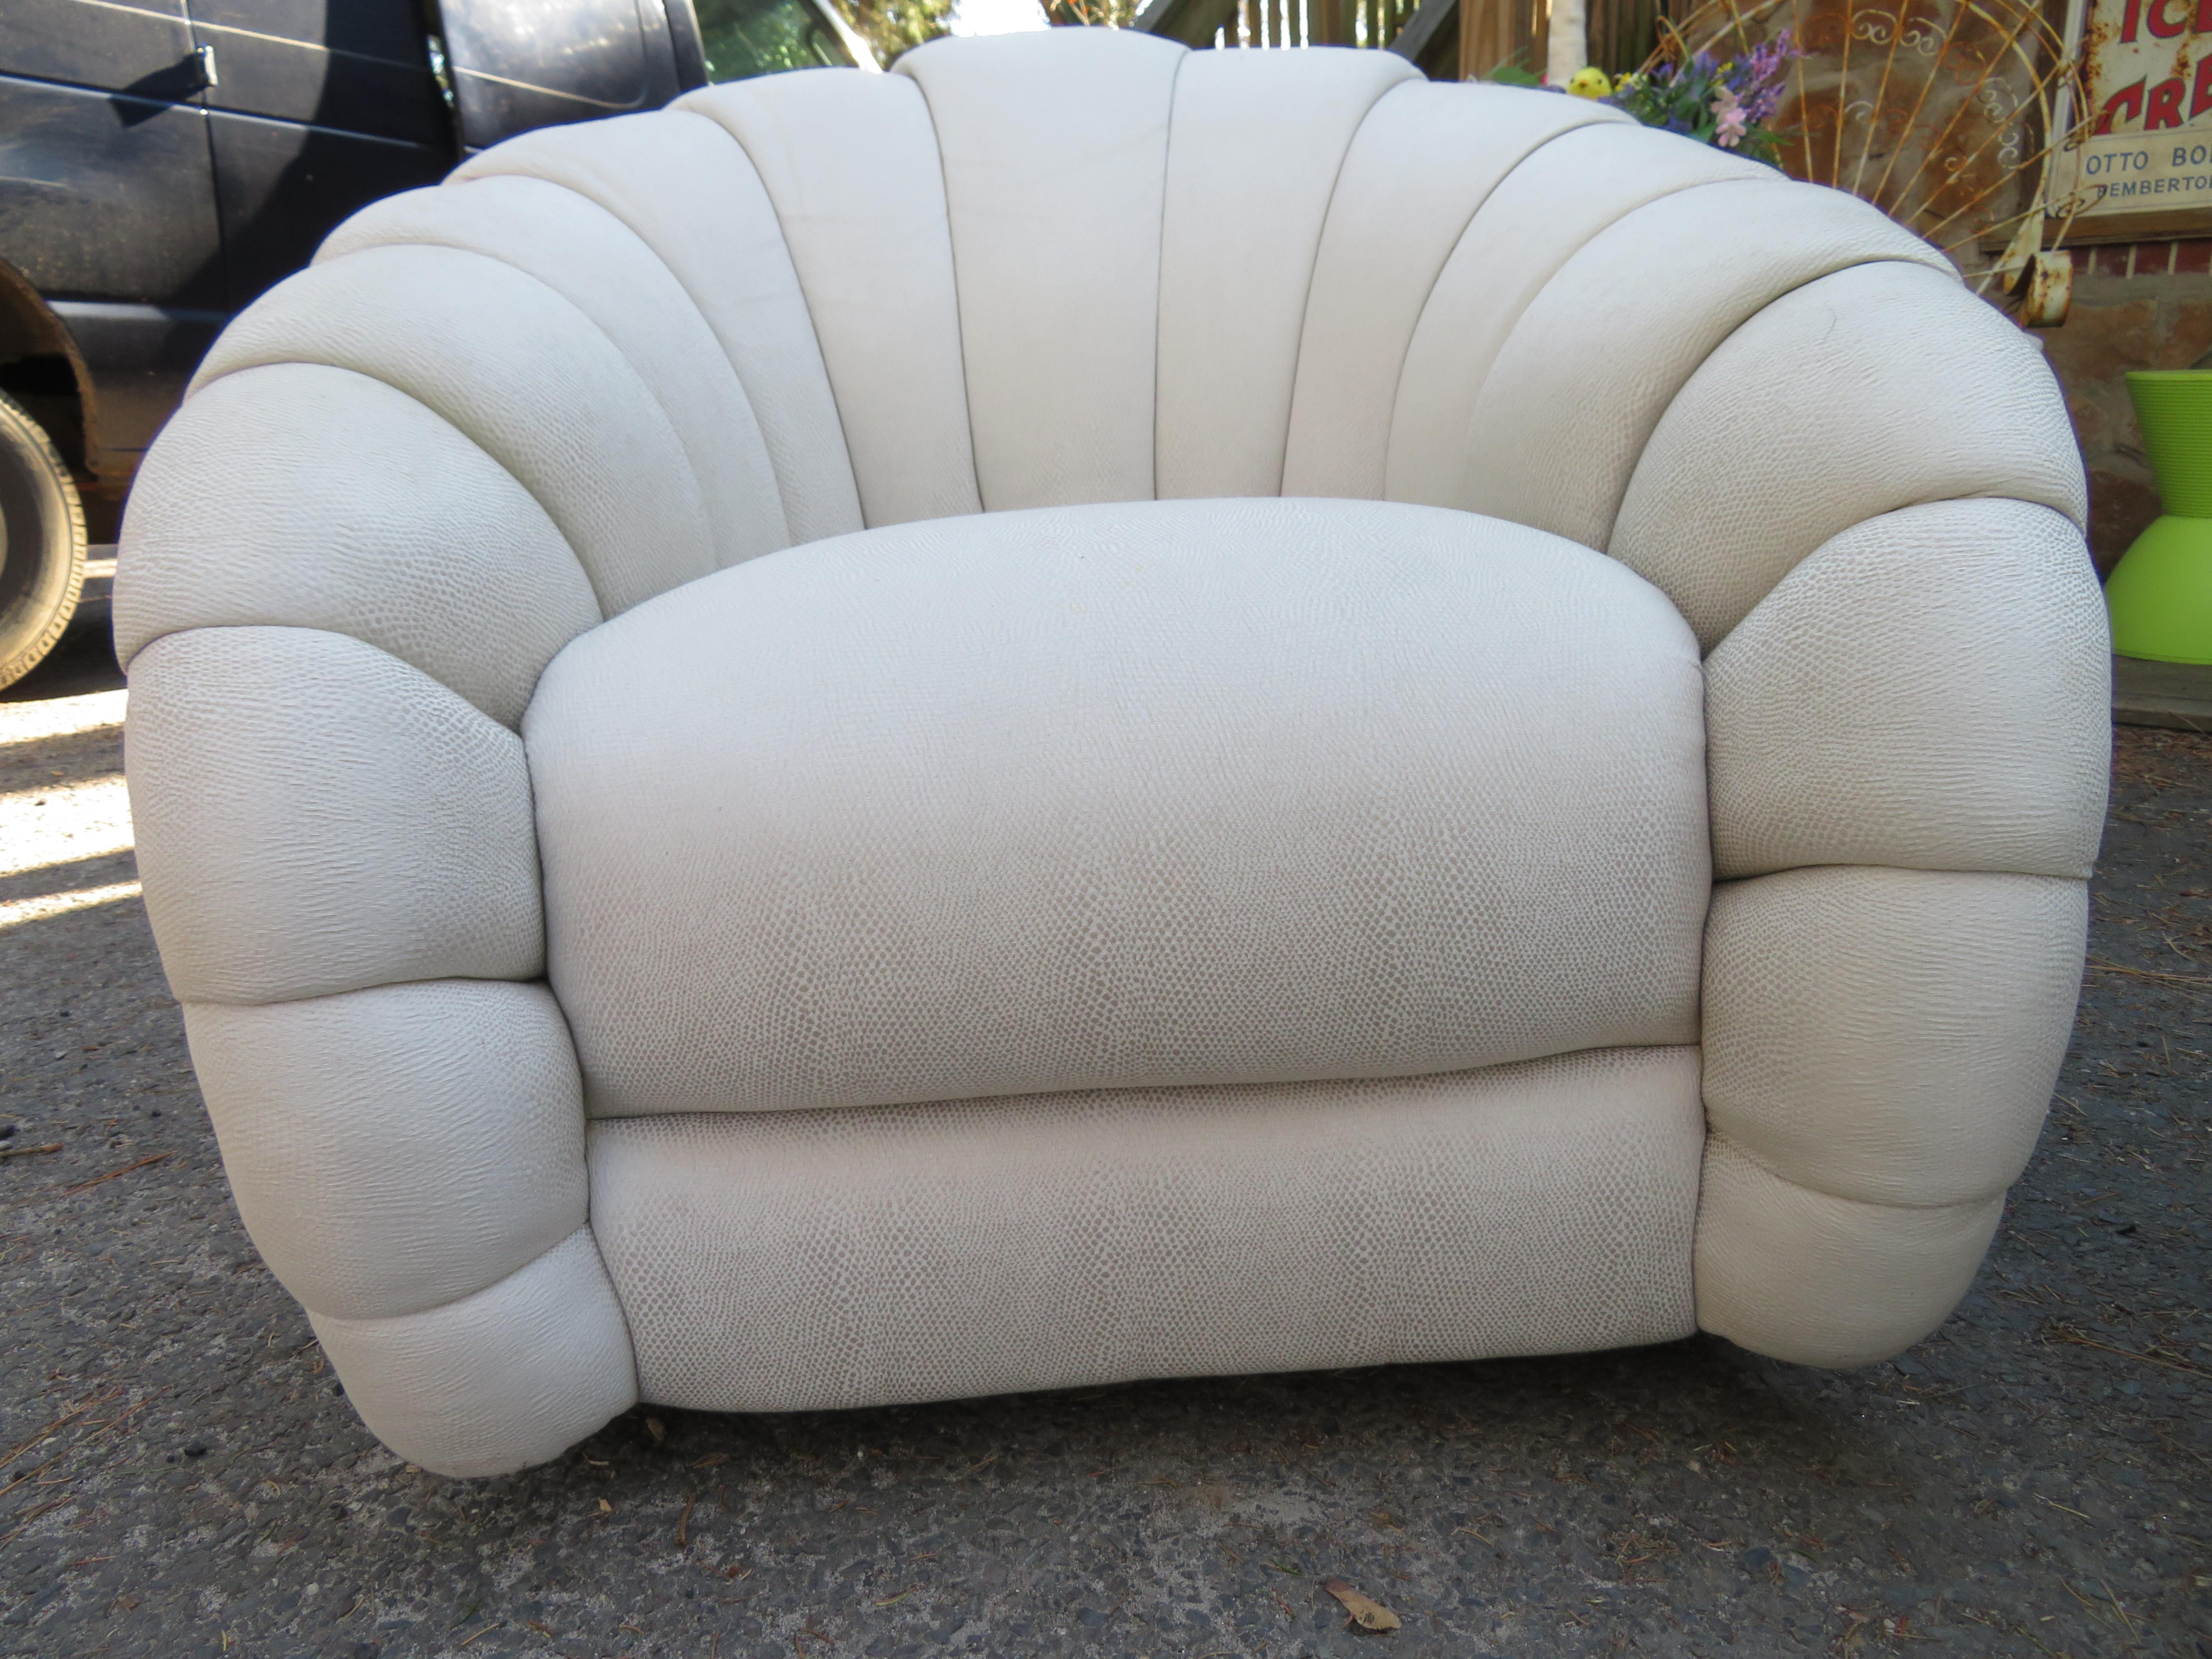 Stunning Pair of Directional Croissant Swivel Lounge Chair Mid-Century In Good Condition For Sale In Pemberton, NJ